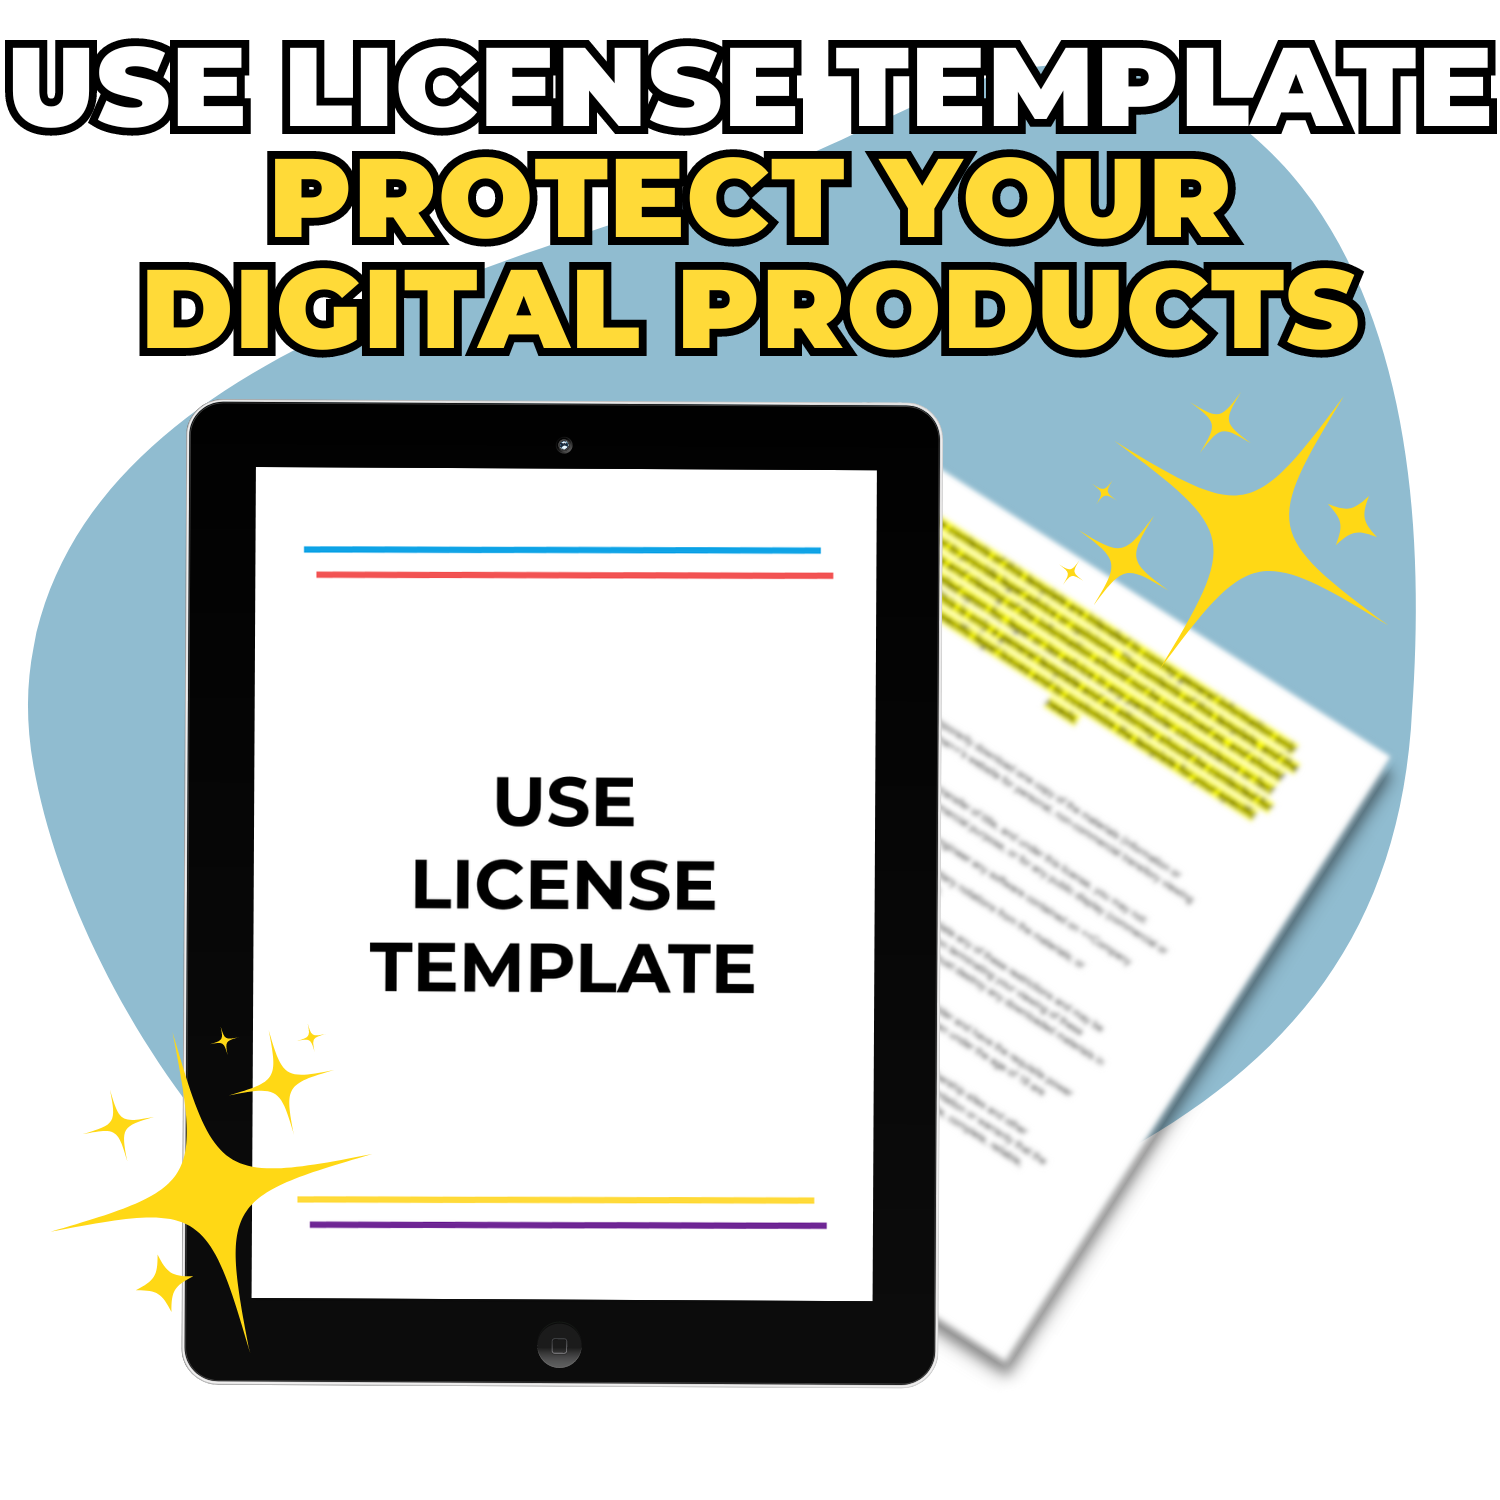 Graphic promoting the use of an ElizabethStapleton.com Use License Clause Template to protect digital products, featuring an image of a tablet displaying the template and sparkles around it.